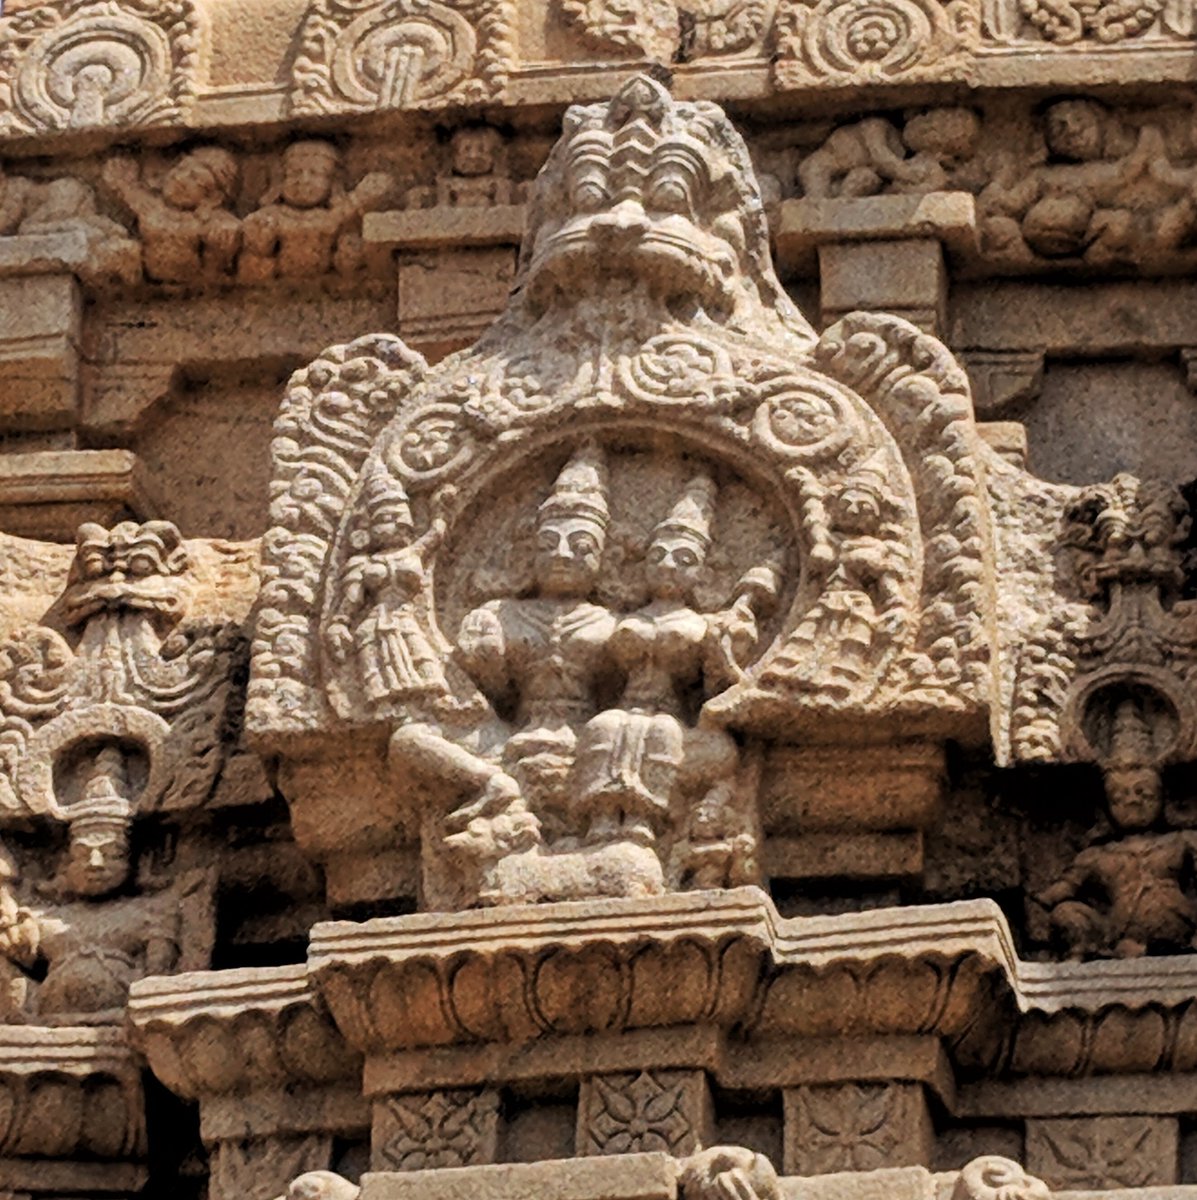 उ is for उमा-महेश्वरा. Pic 4 is a small sculpture, on the vimana of the main shrine, carved within a gavaksha. Both Parvati and Shiva face the front, and only Nandi is seen at their feet (Bhoganandeeshwara temple near Bangalore, 9th/10th century CE)  #AksharArt  #ArtByTheLetter